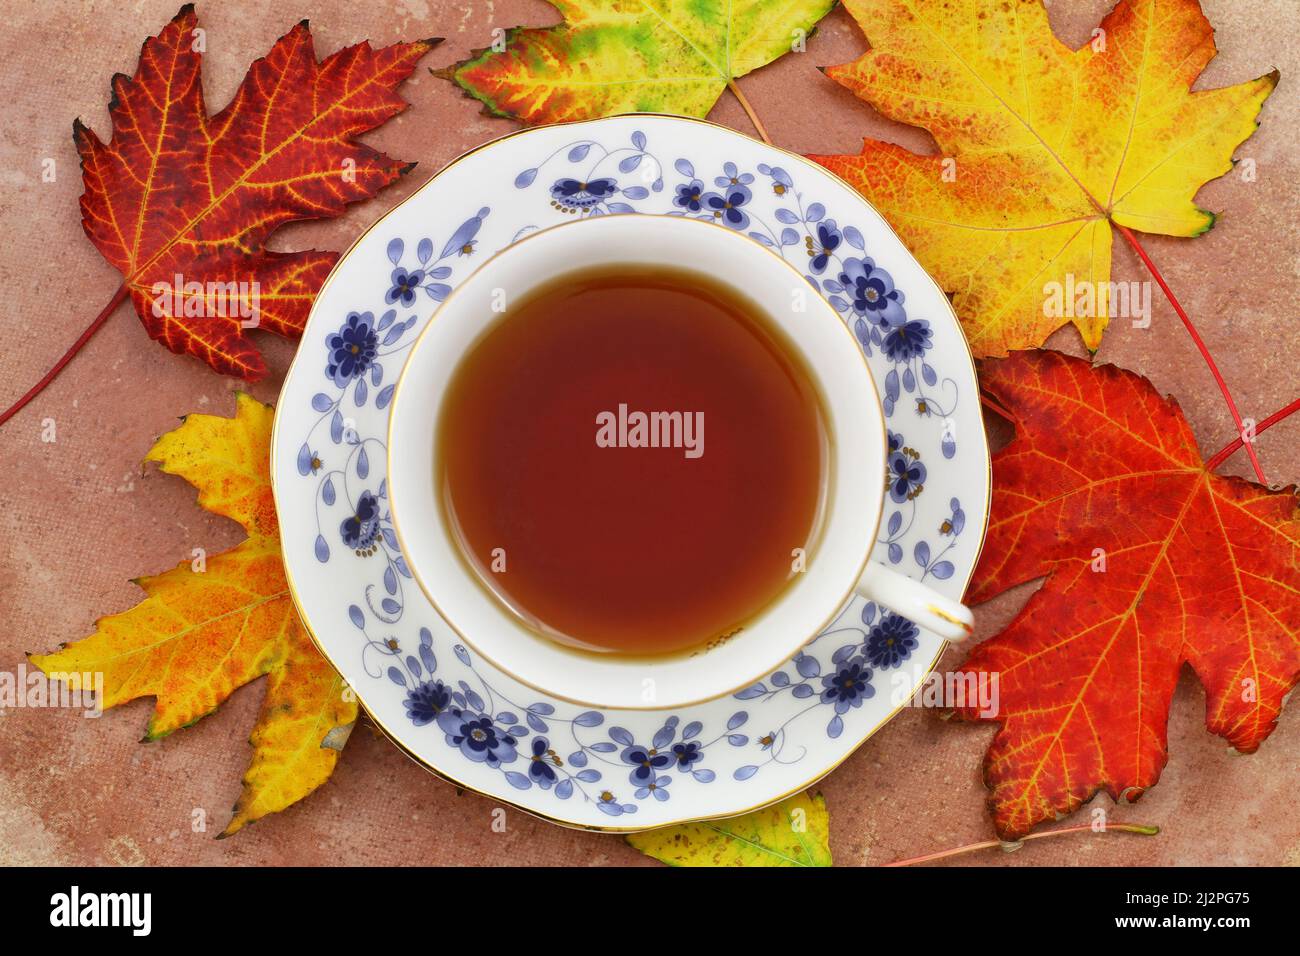 Black tea in vintage cup on top of colorful autumn maple leaves on rustic wooden surface Stock Photo